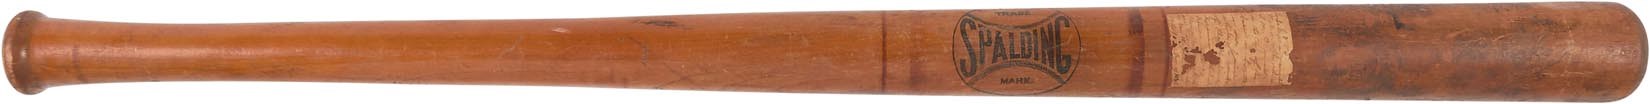 Early Baseball - 1880 Spalding "New Haven" Bat w/Earliest Known Use of the Term Memorabilia (Samuel M. Chase Collection)